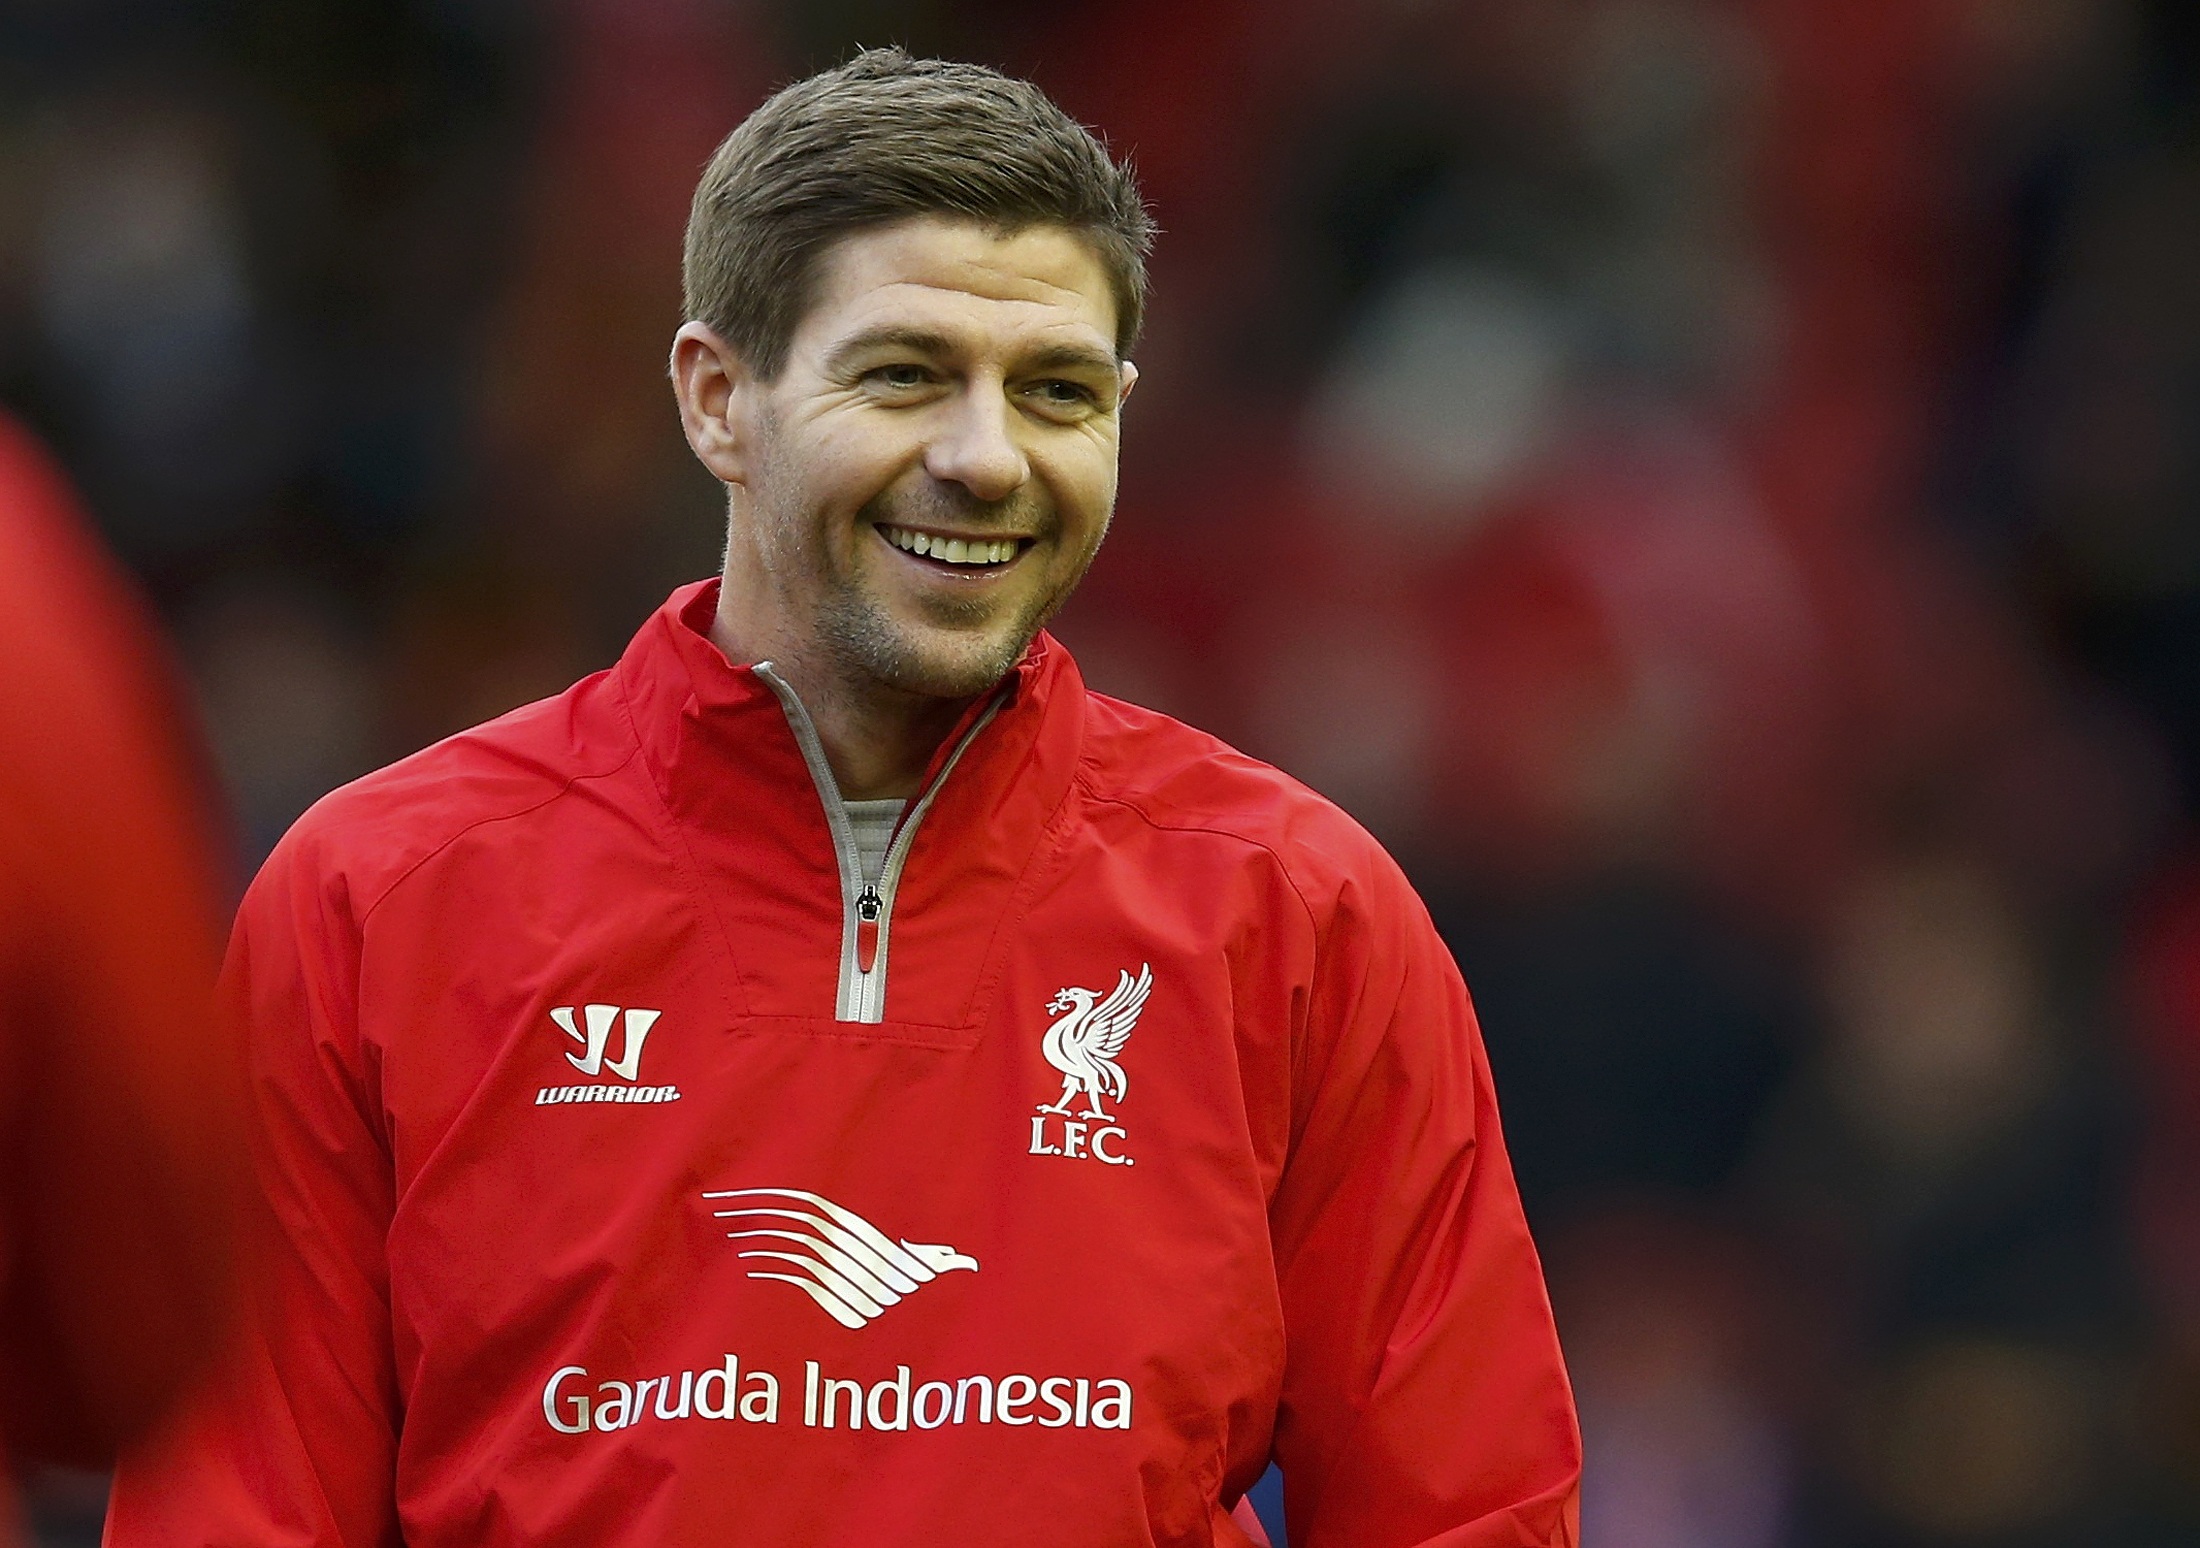 Liverpool's Steven Gerrard smiles during his warm up before his team's English Premier League soccer match against Sunderland at Anfield in Liverpool